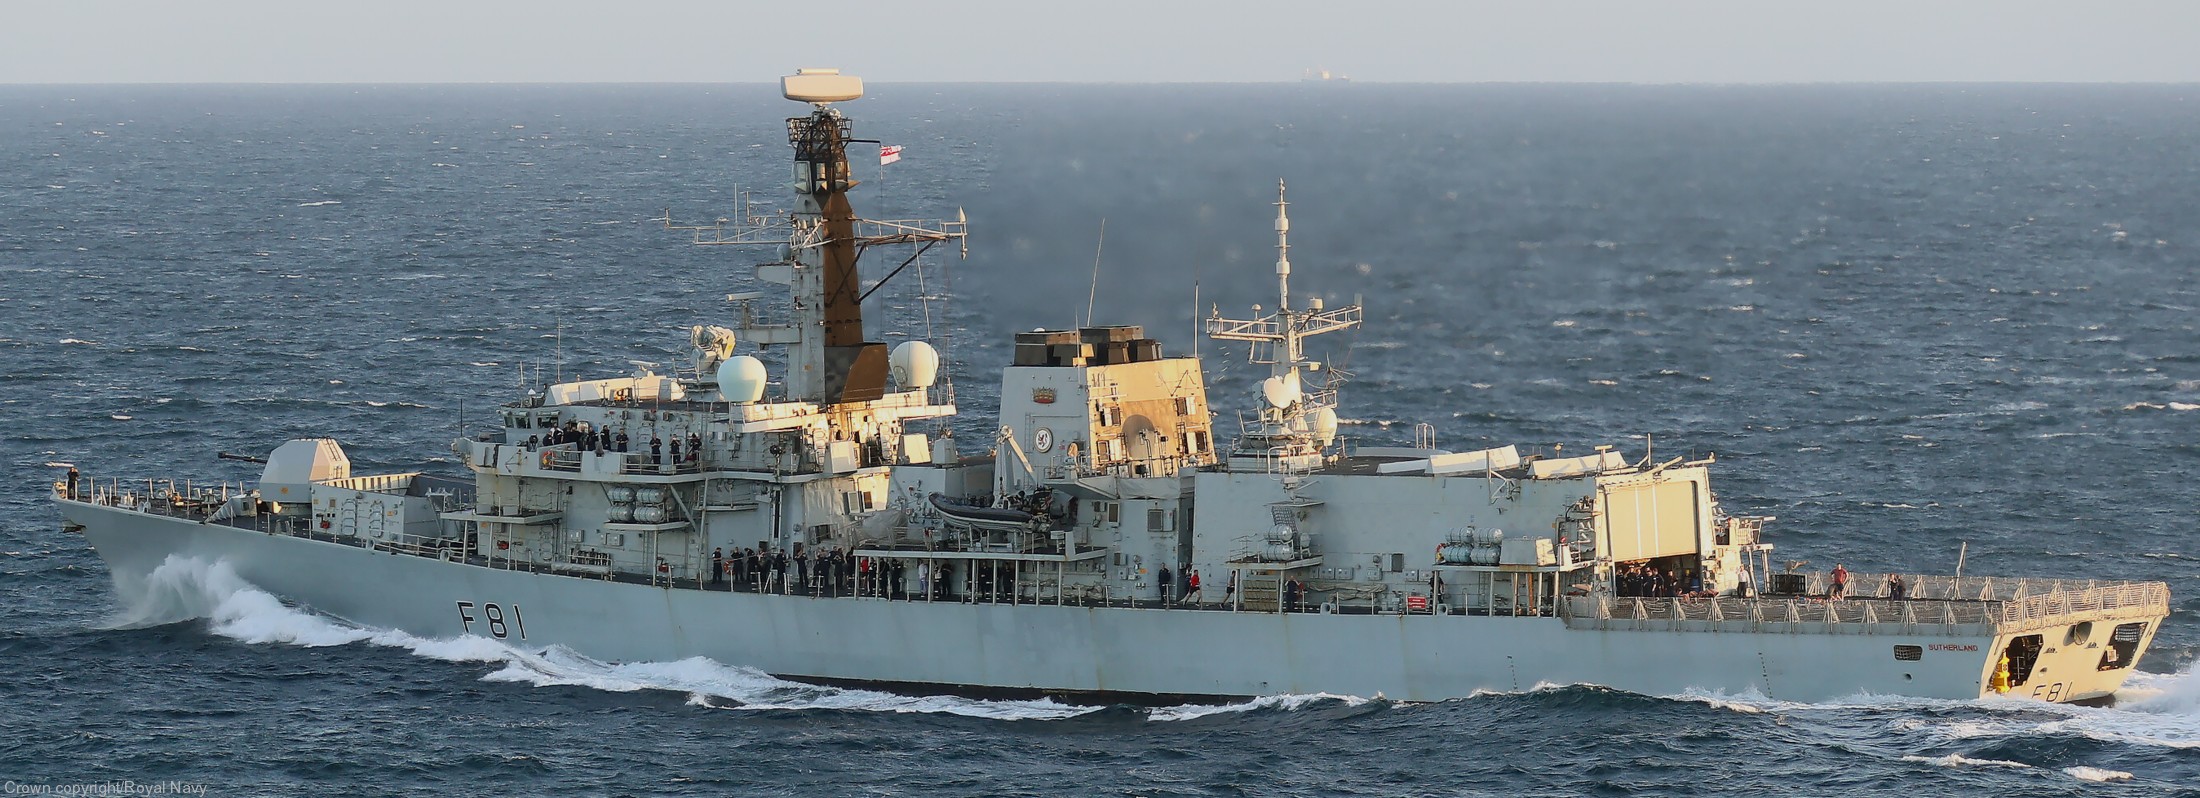 f-81 hms sutherland type 23 duke class guided missile frigate ffg royal navy 27